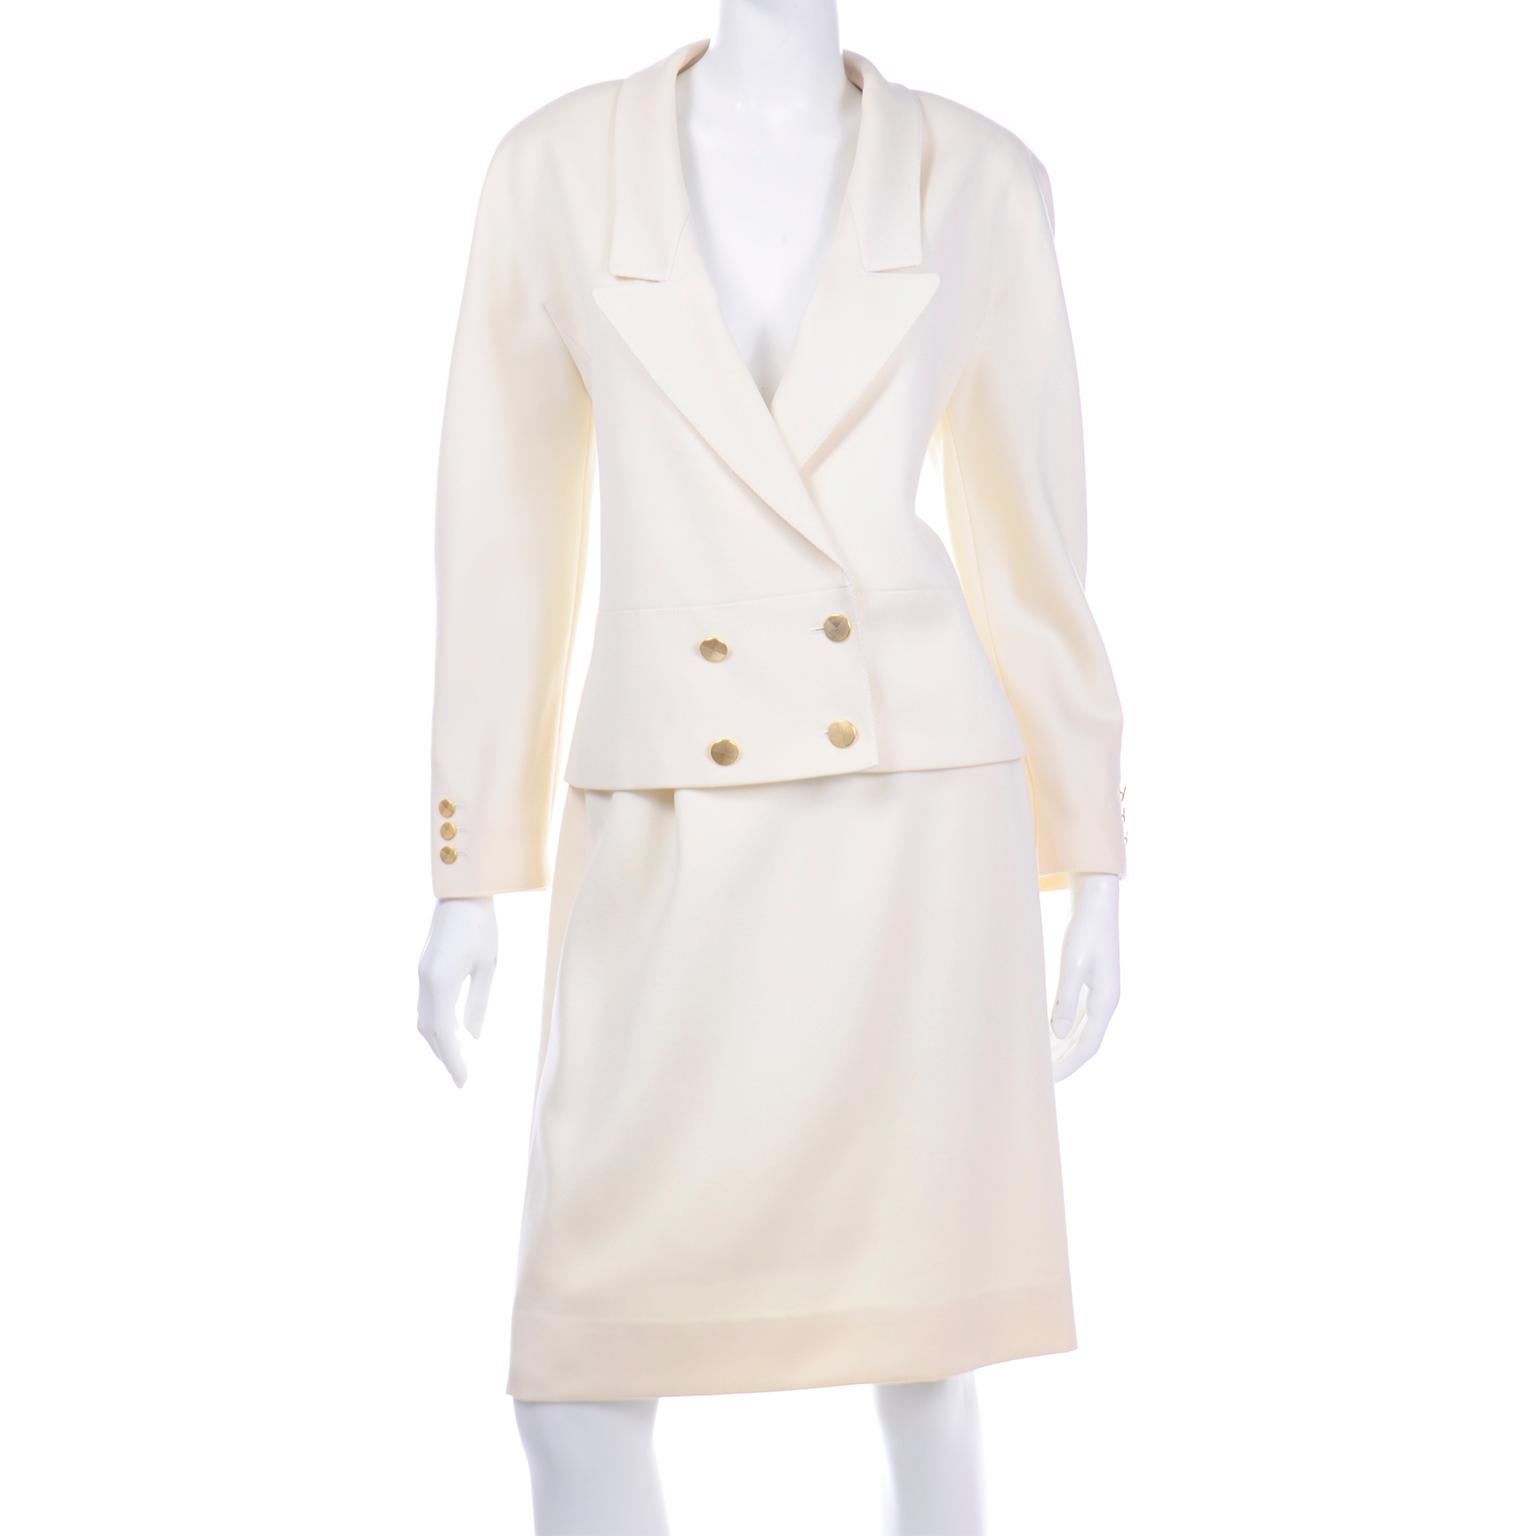 Vintage Louis Feraud Cream Jacket and Skirt Suit 1980s In Excellent Condition For Sale In Portland, OR